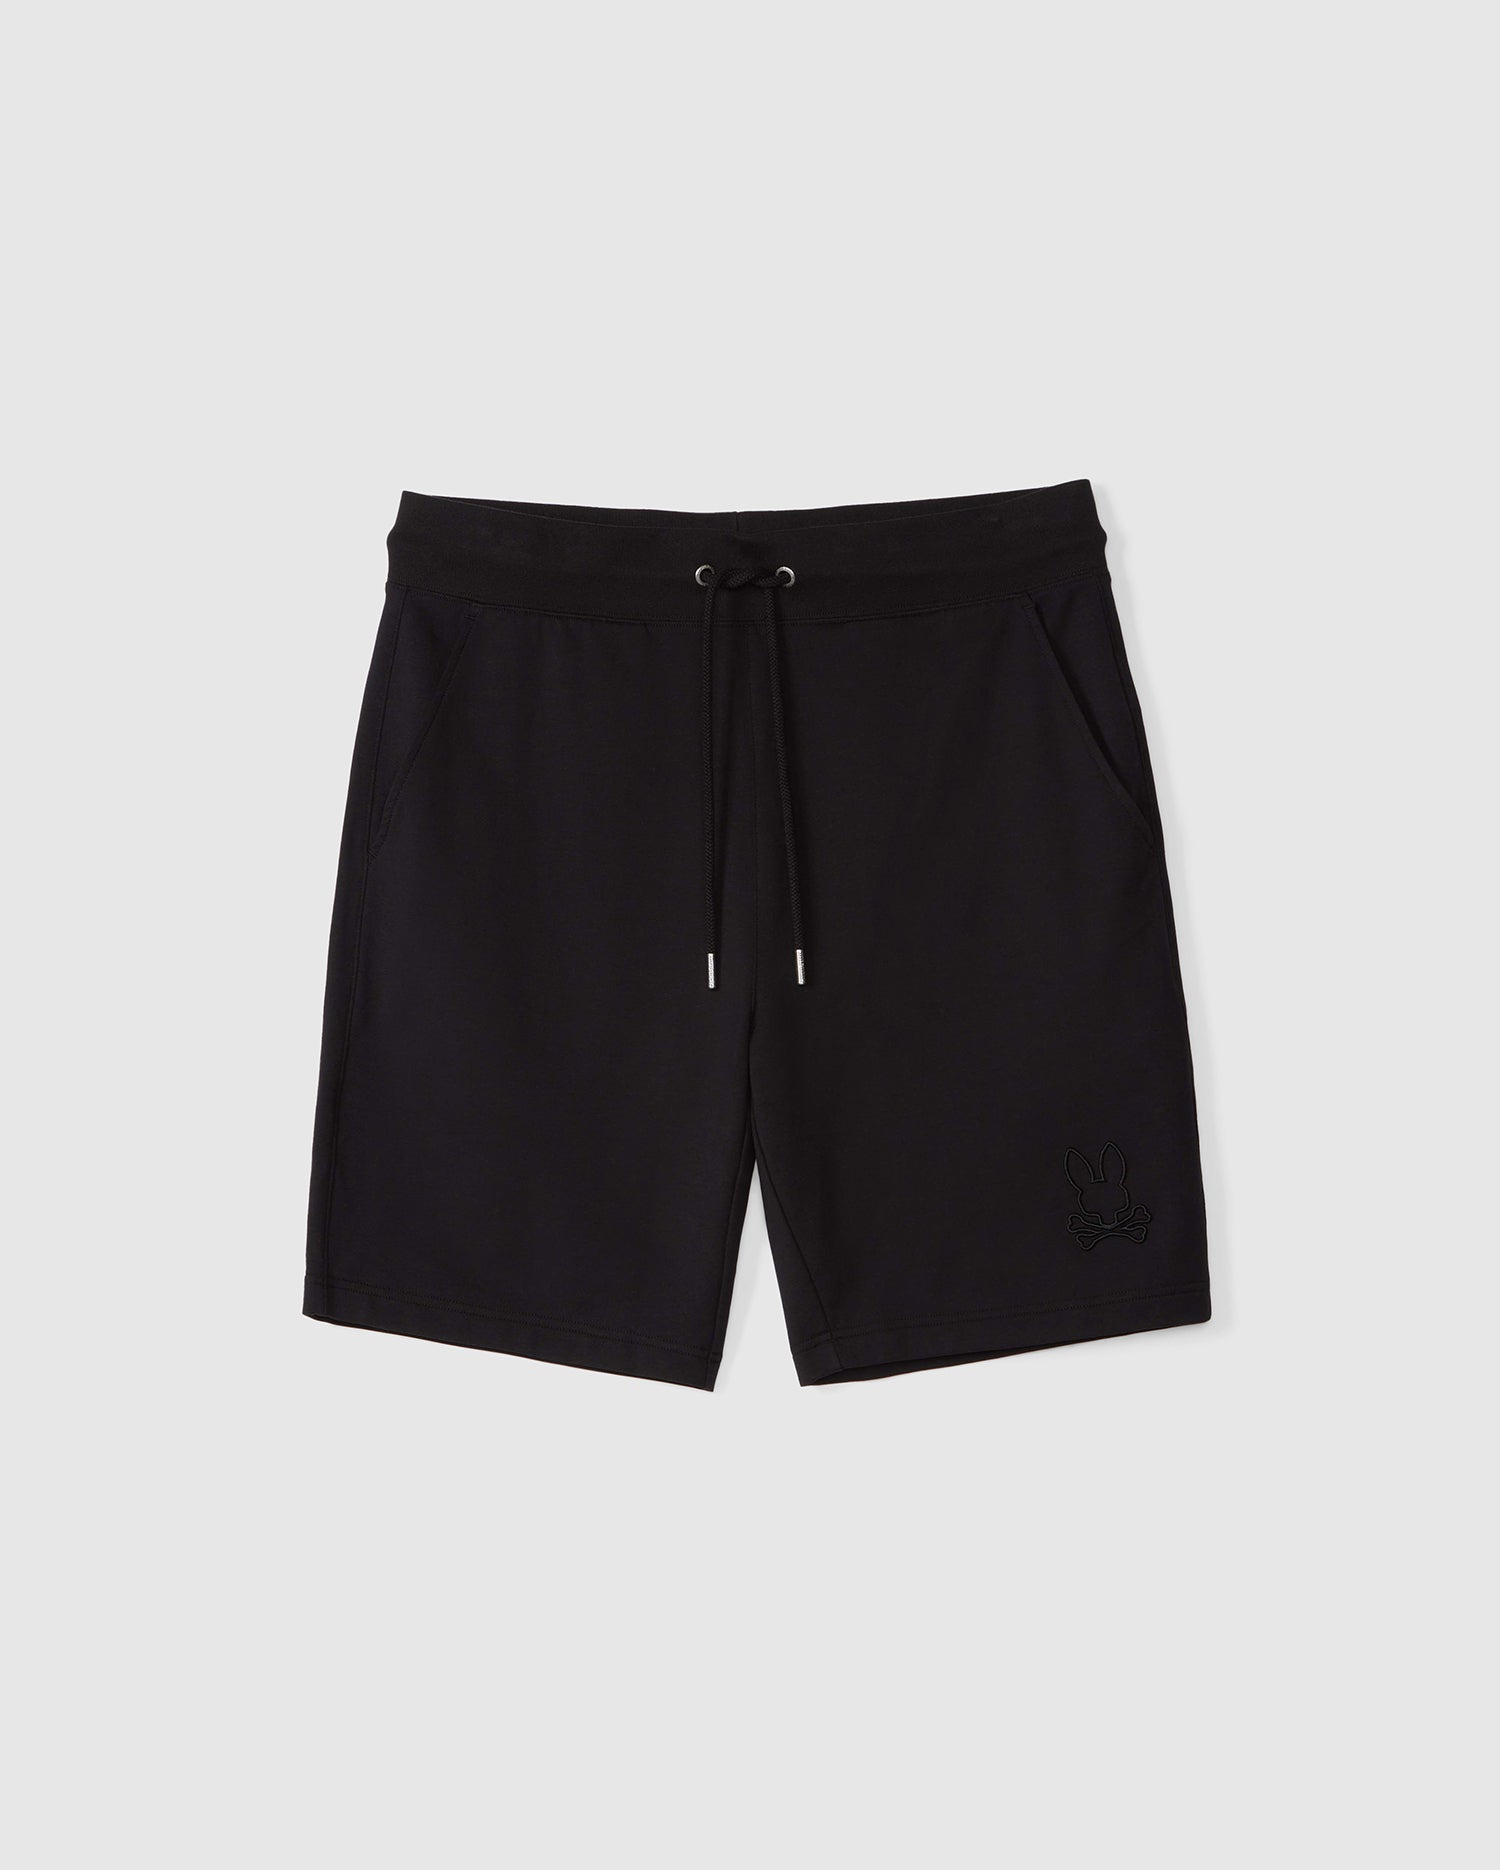 A pair of black athletic shorts crafted from micro French terry for ultimate comfort, featuring an elastic waistband and a drawstring closure. The MENS LIVINGSTON SWEATSHORT - B6R408B200 by Psycho Bunny has side pockets and showcases a small embroidered logo of a bunny on the bottom left leg. The background is a plain light grey.